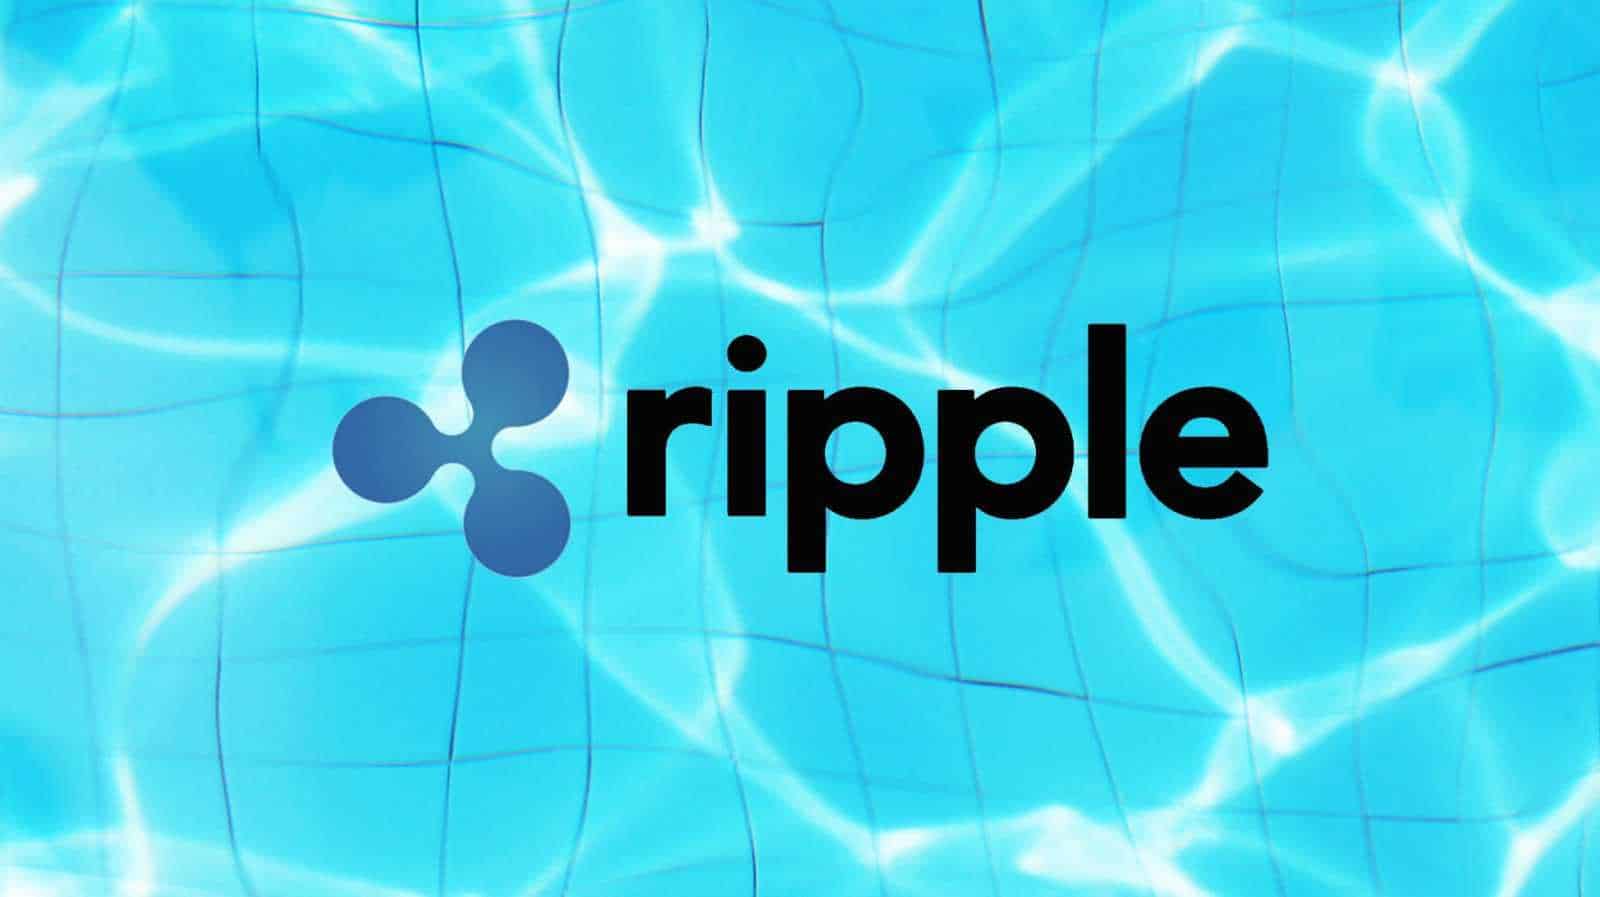 future price of ripple cryptocurrency